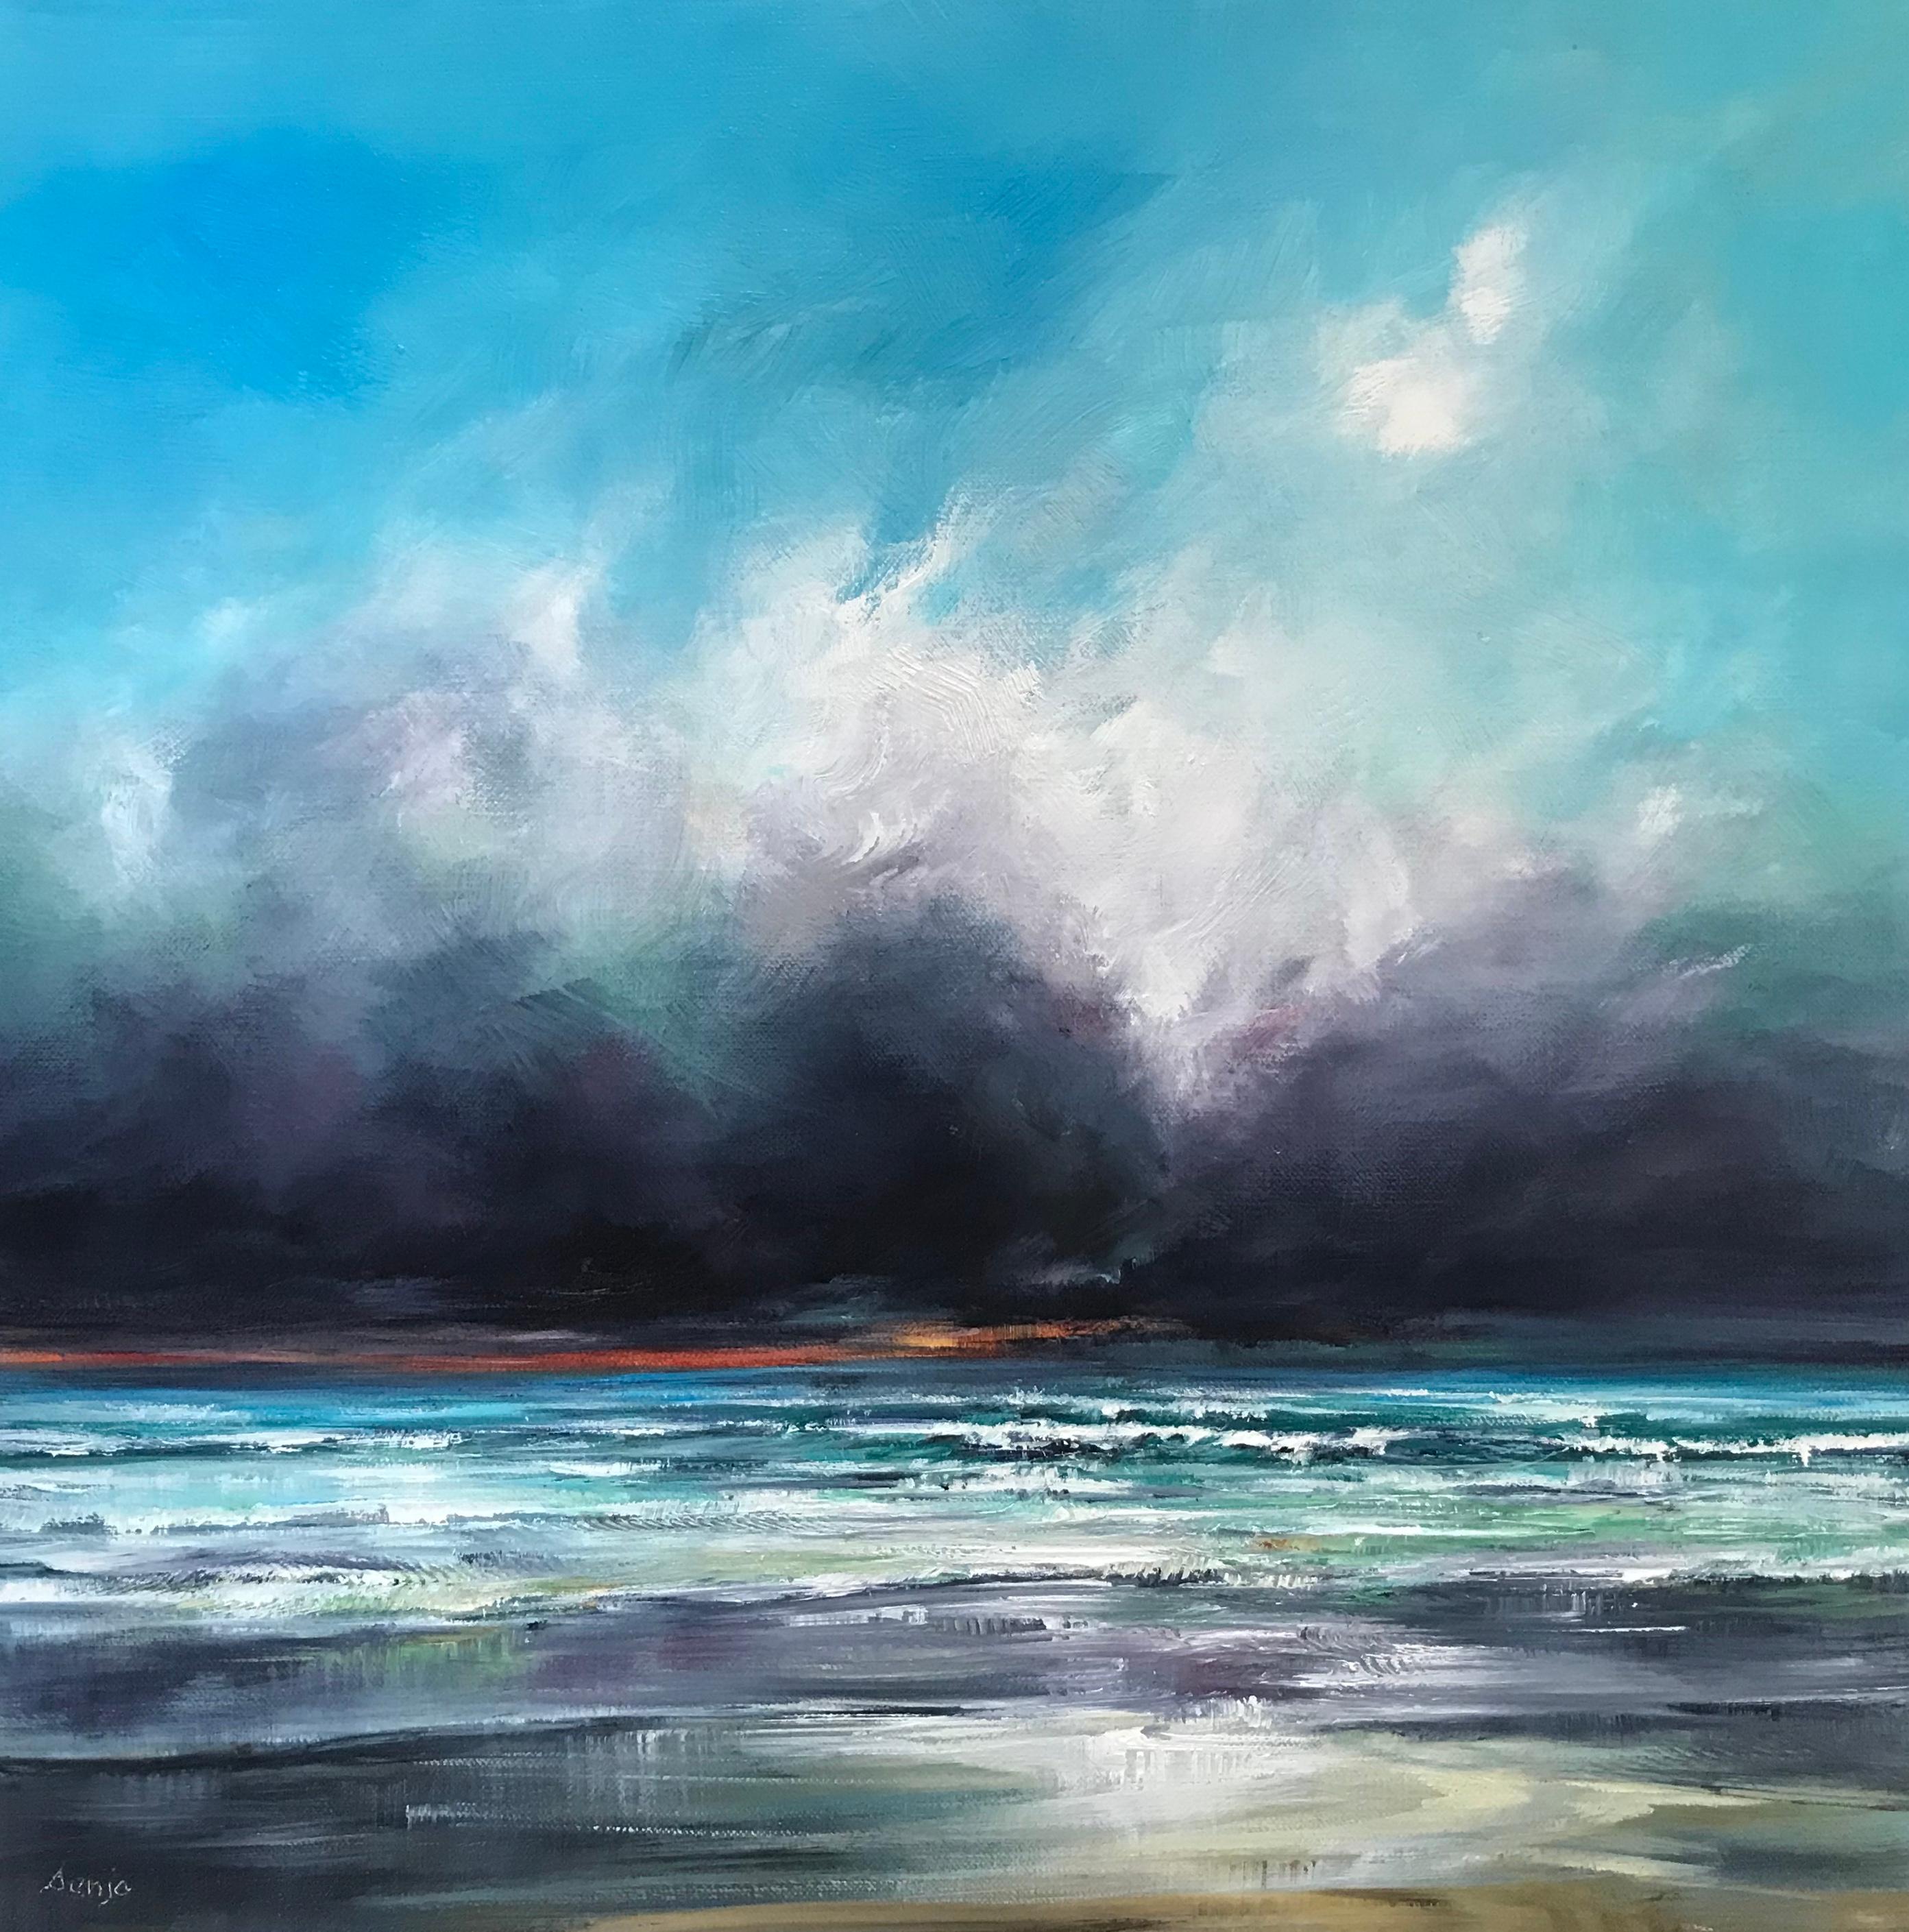 39 x 39cm - image size
59 x 59cm - frame size

Born in Pembrokeshire, Wales, in 1968, Senja Brendon began life by the sea, before moving to the Lake District to grow up surrounded by the breathtaking landscape. Daughter to the outdoor adventure